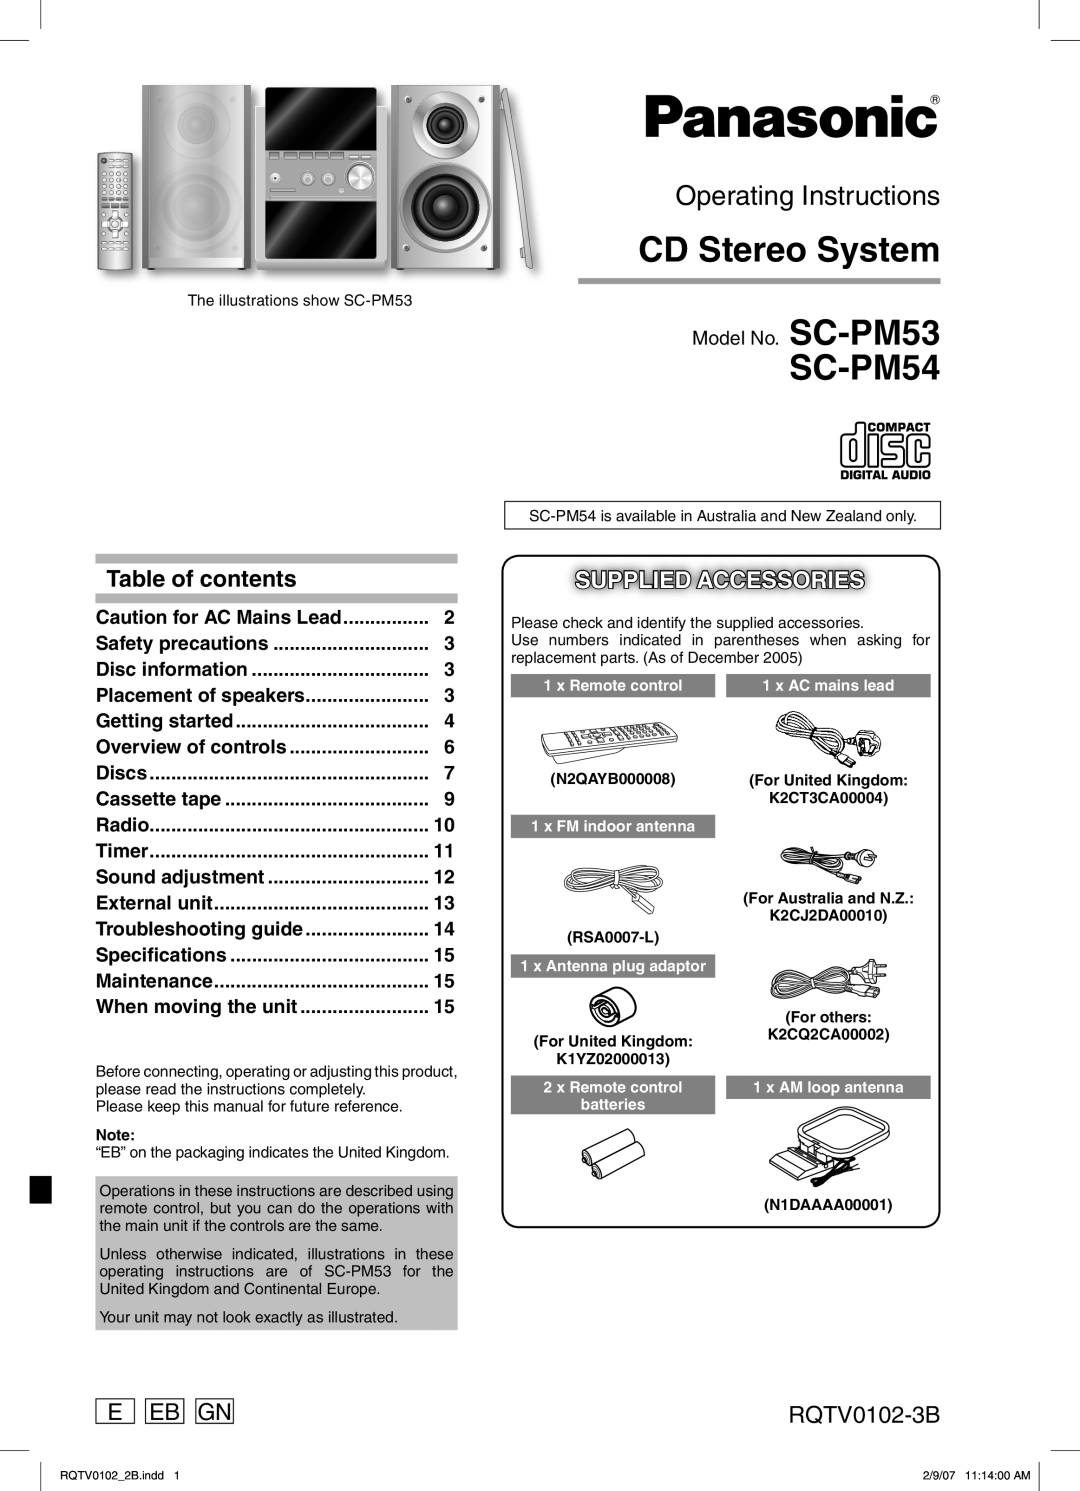 Panasonic SC-PM54 specifications Table of contents, Supplied Accessories, E Eb Gn, RQTV0102-3B, CD Stereo System 